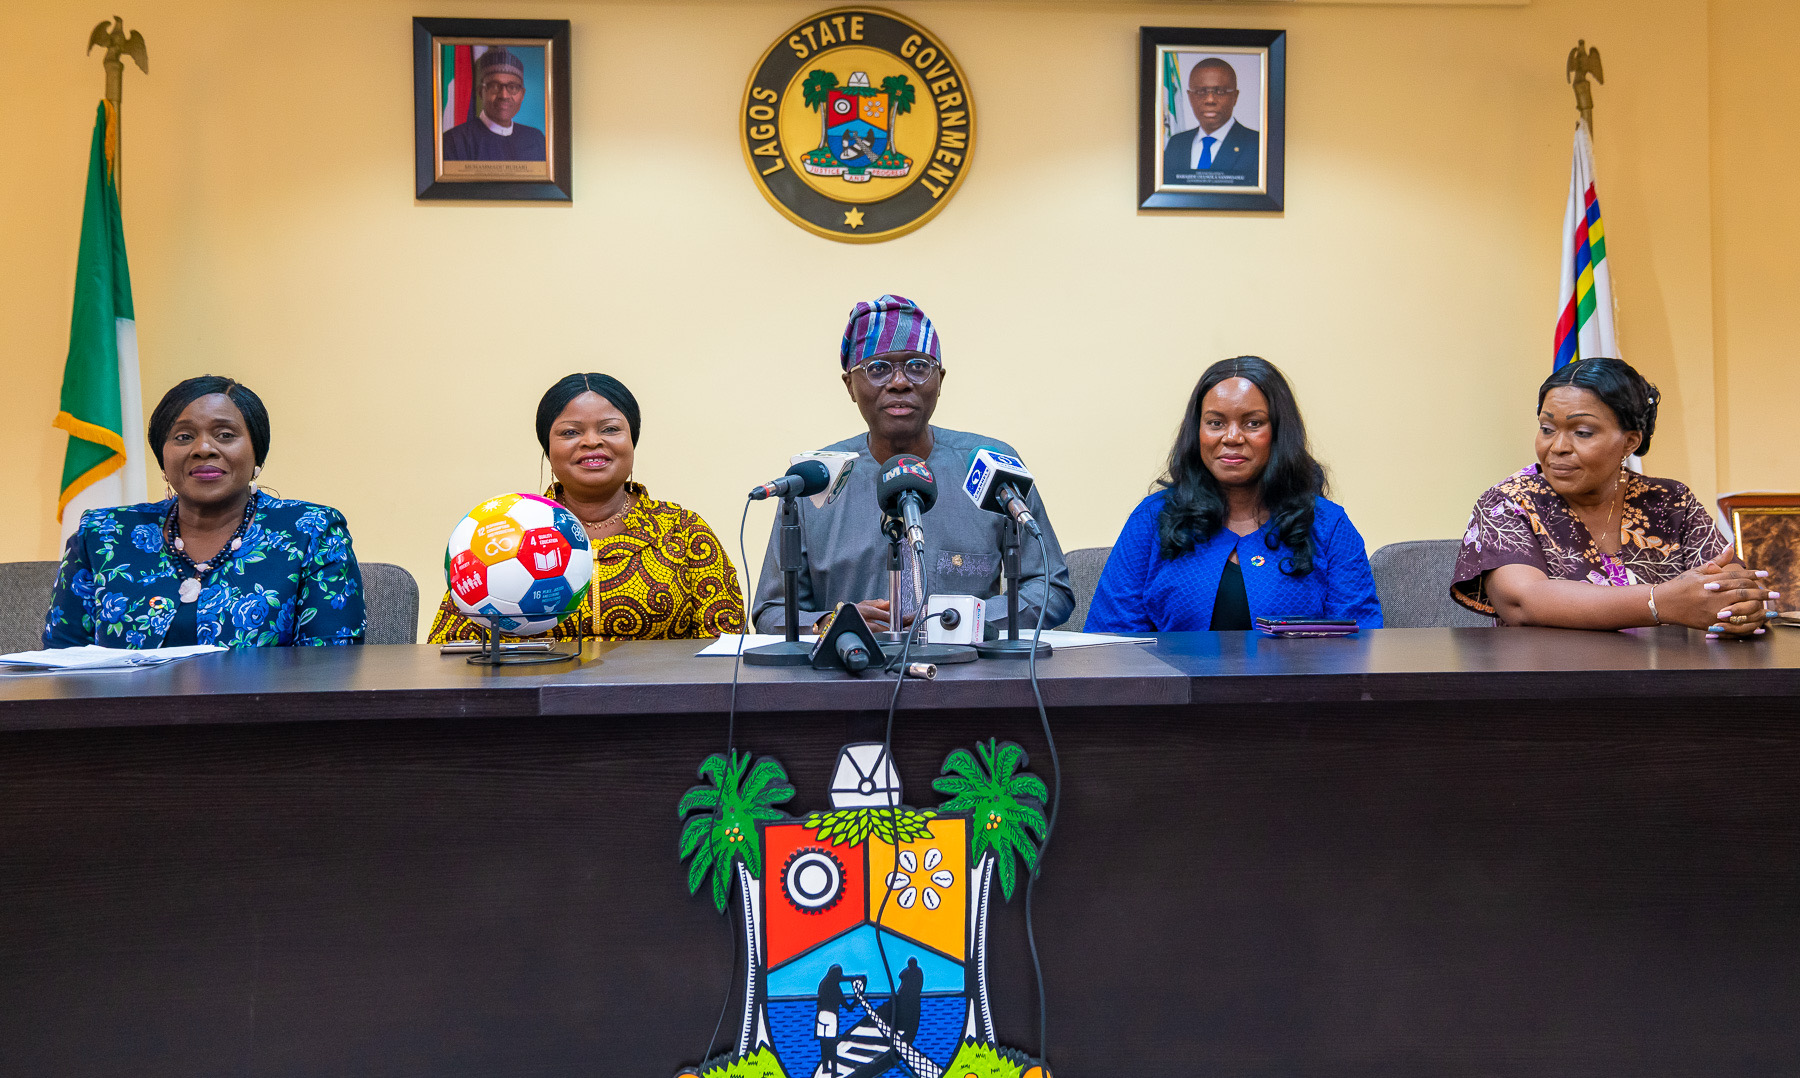 L-R: Chairman, Advisory Board, 17 Goals Africa, Mrs. Joke Silva; Senior Special Assistant to the President on Sustainable Development Goals (SDGs), Princess Adejoke Orelope-Adefulire; Lagos State Governor, Mr. Babajide Sanwo-Olu; Special Adviser to the Governor on SDGs & Lagos Global, Mrs Solape Hammond and Special Adviser, Office of Civic Engagement, Princess Aderemi Adebowale, during the presentation of the 2020 Global Goals Women World Cup Ball to the Governor at Lagos House, Marina, on Friday, March 13, 2020.